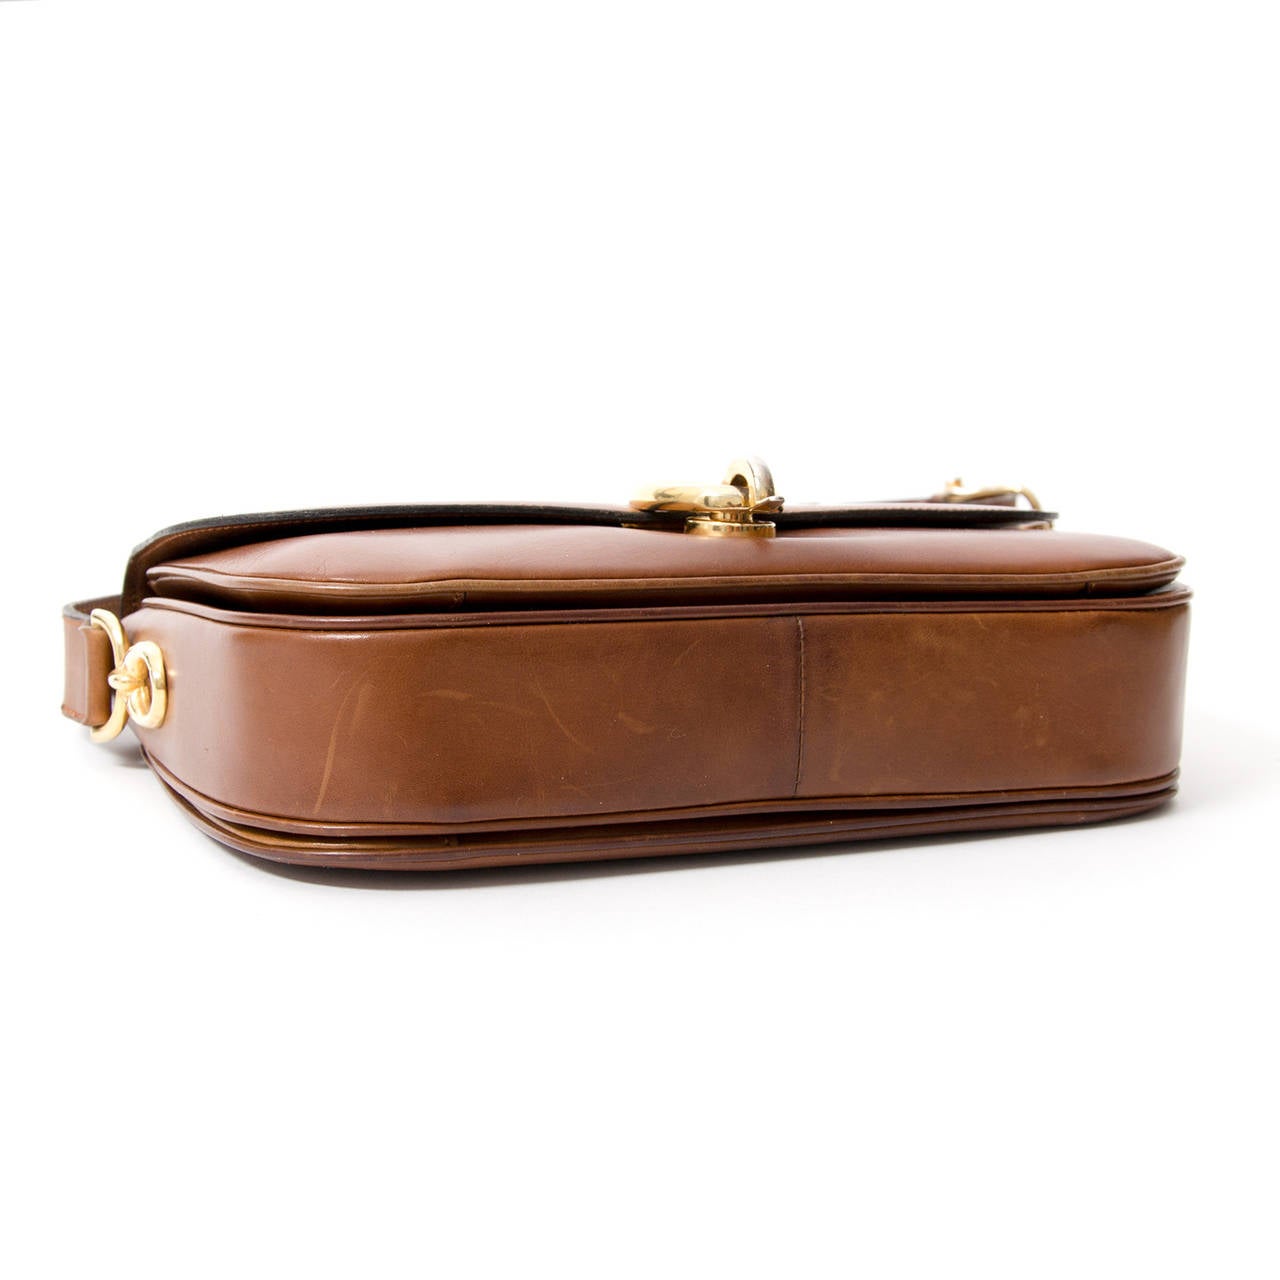 Adjustable shoulderstrap and gold metal hardware. Buccle closing. Leather inside features three compartments.
Middle compartment contains two small side pockets and back compartment features zipper bag.